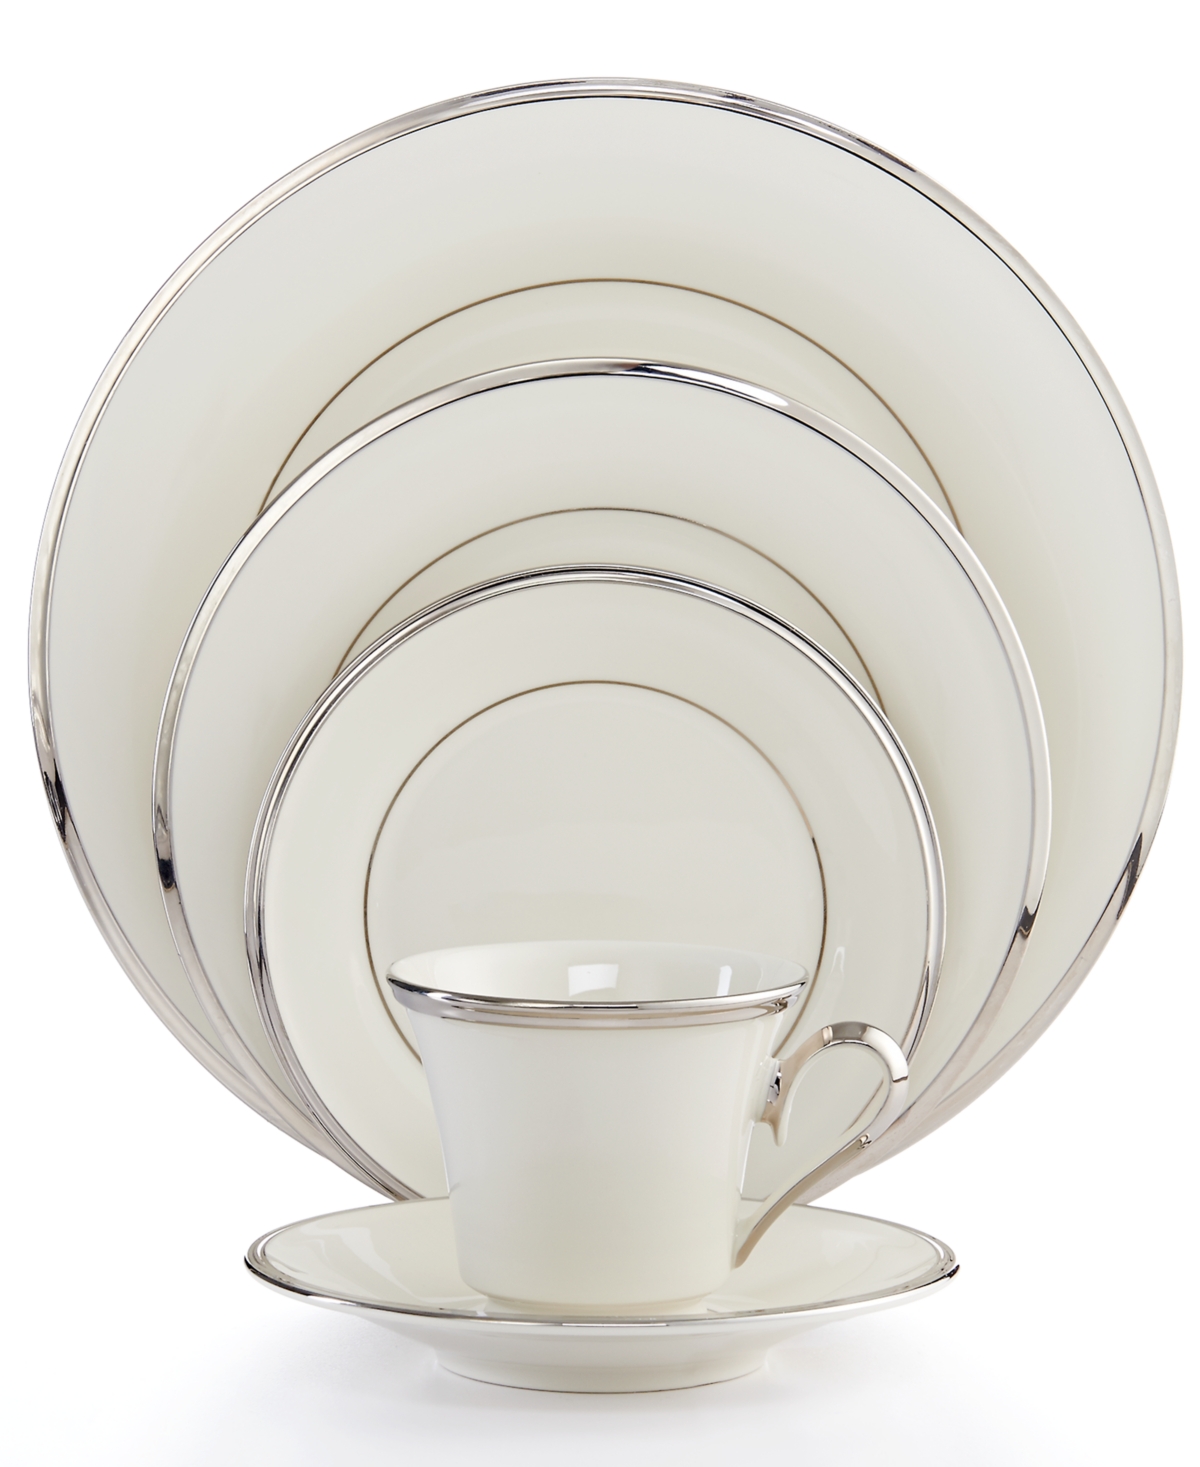 Lenox "solitaire" 5-piece Place Setting In No Color